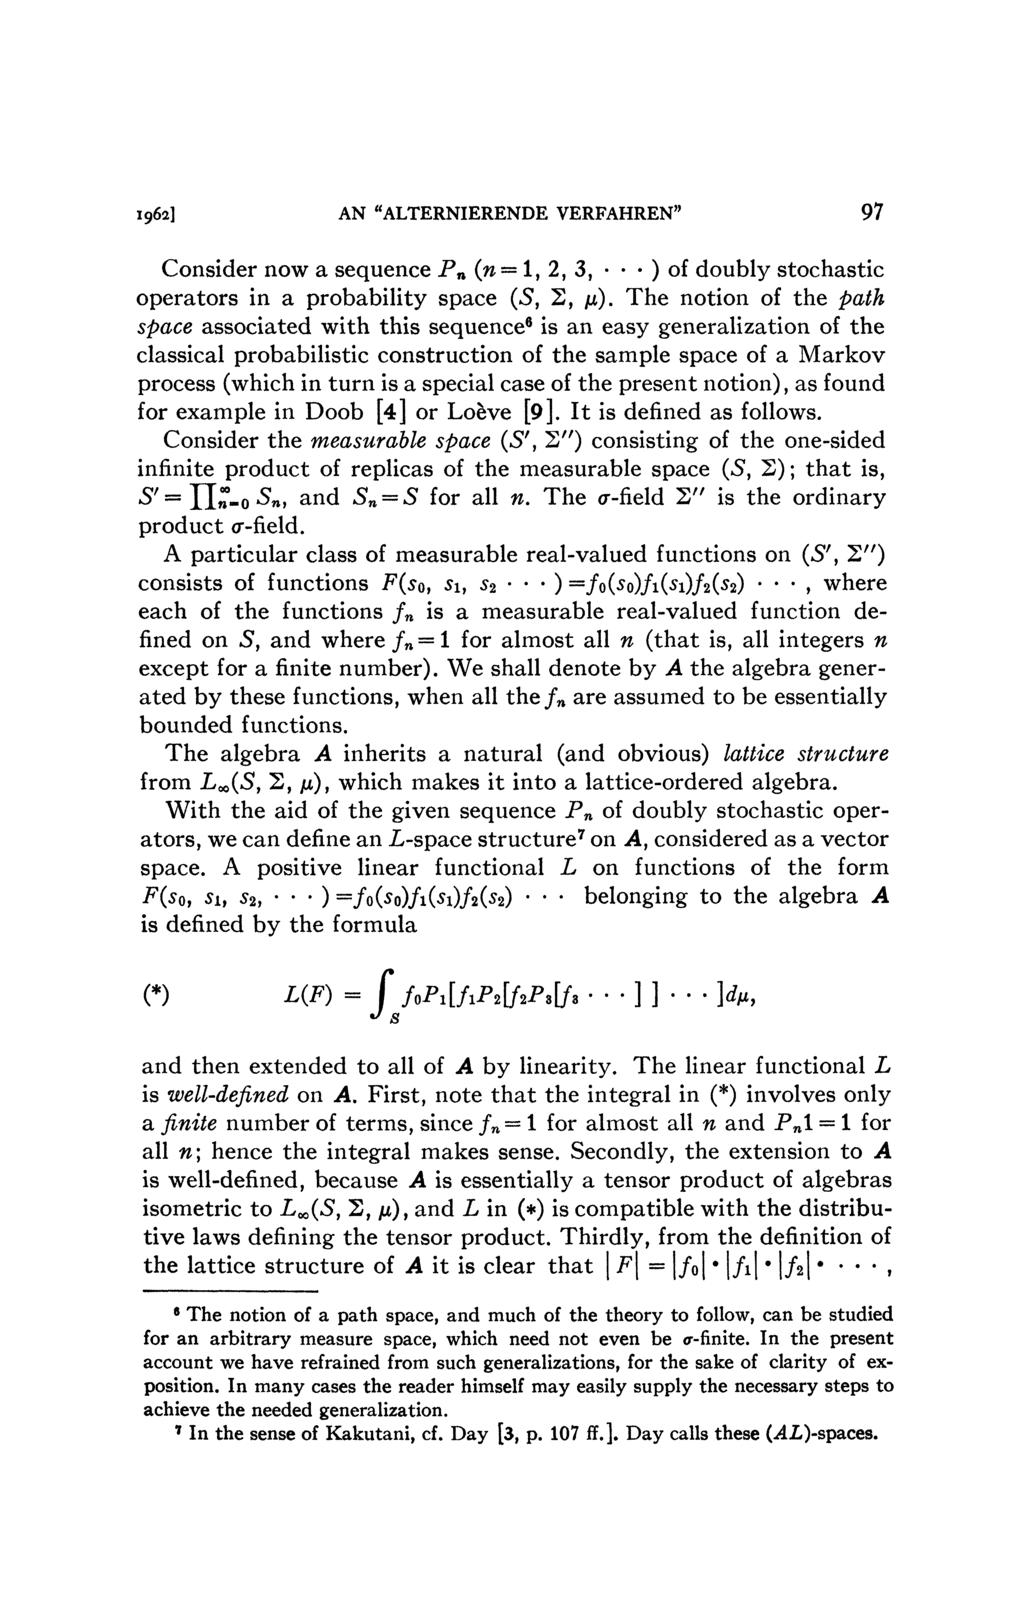 1962) AN "ALTERNIERENDE VERFAHREN" 97 Consider now a sequence P n (n~ 1, 2, 3, ) of doubly stochastic operators in a probability space (5, 2, /*).